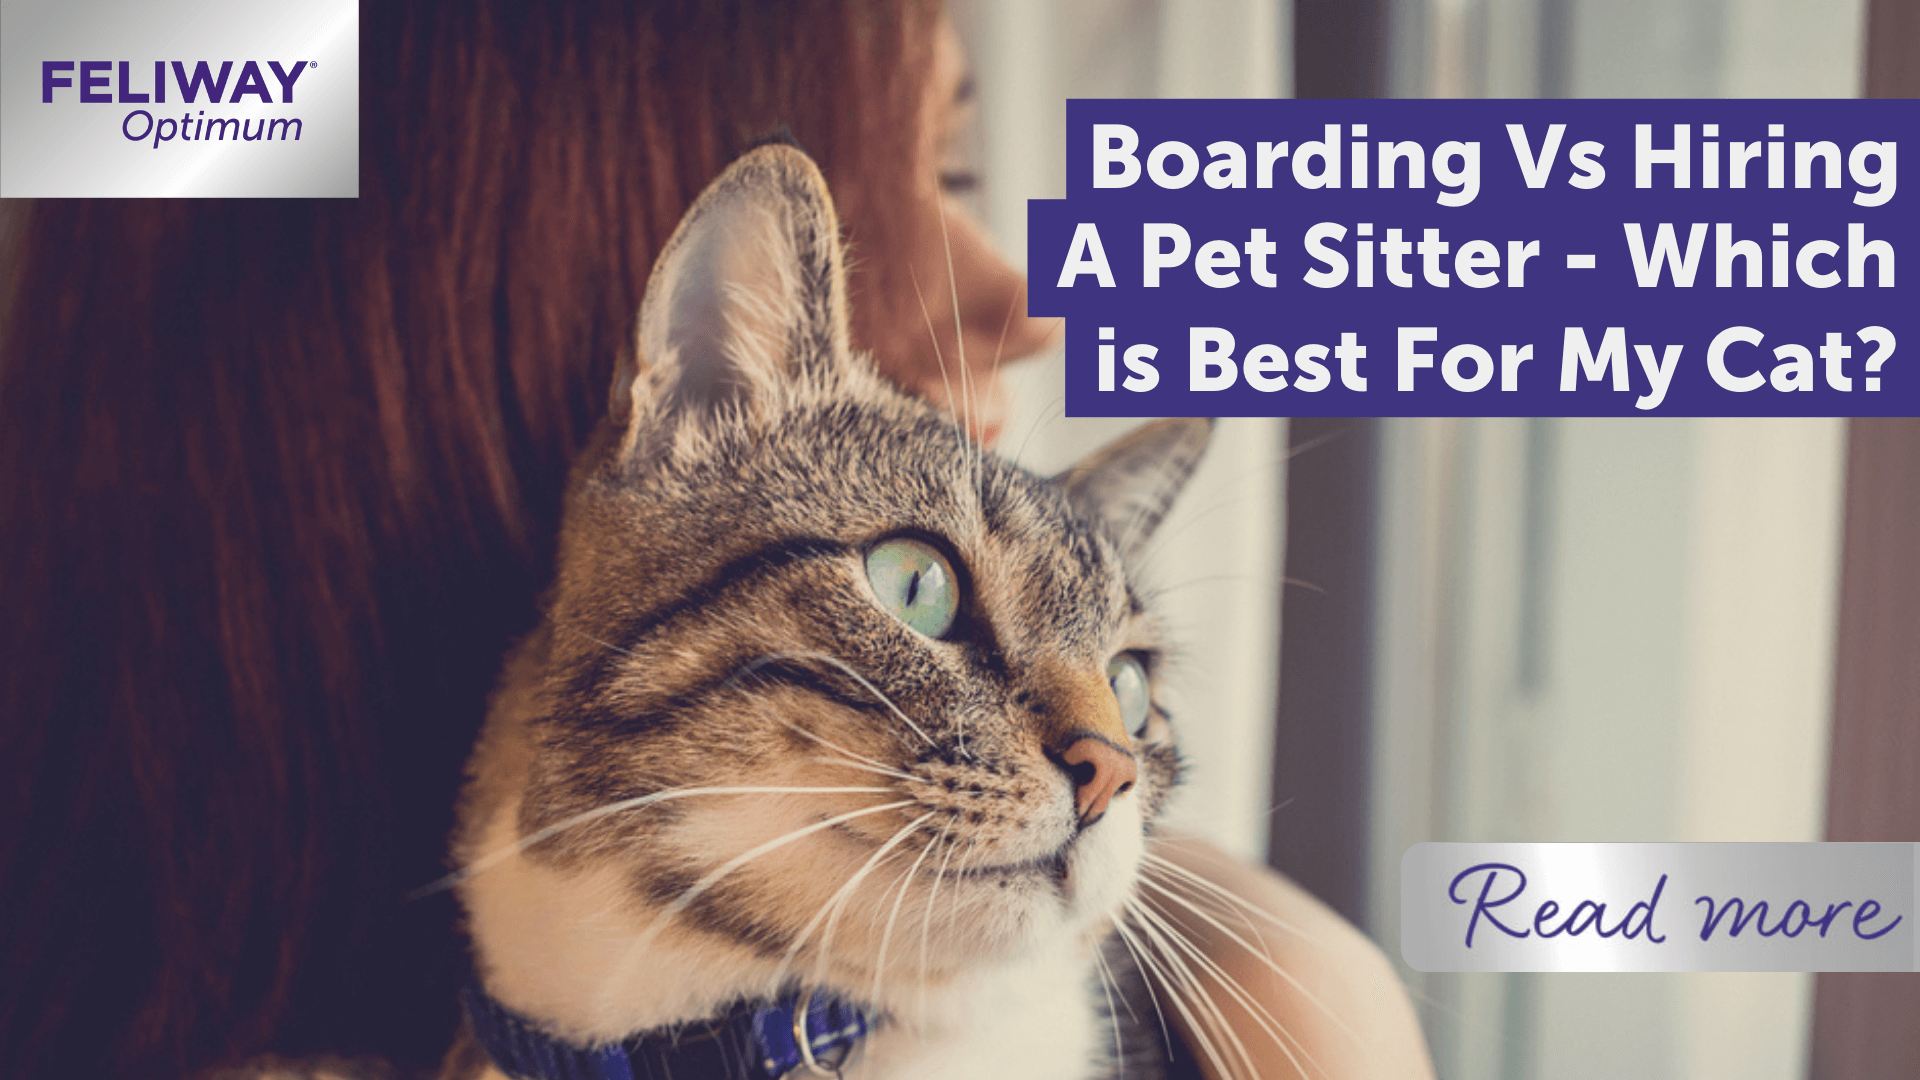 Boarding Vs Hiring a Pet Sitter - Which Is Best For My Cat?